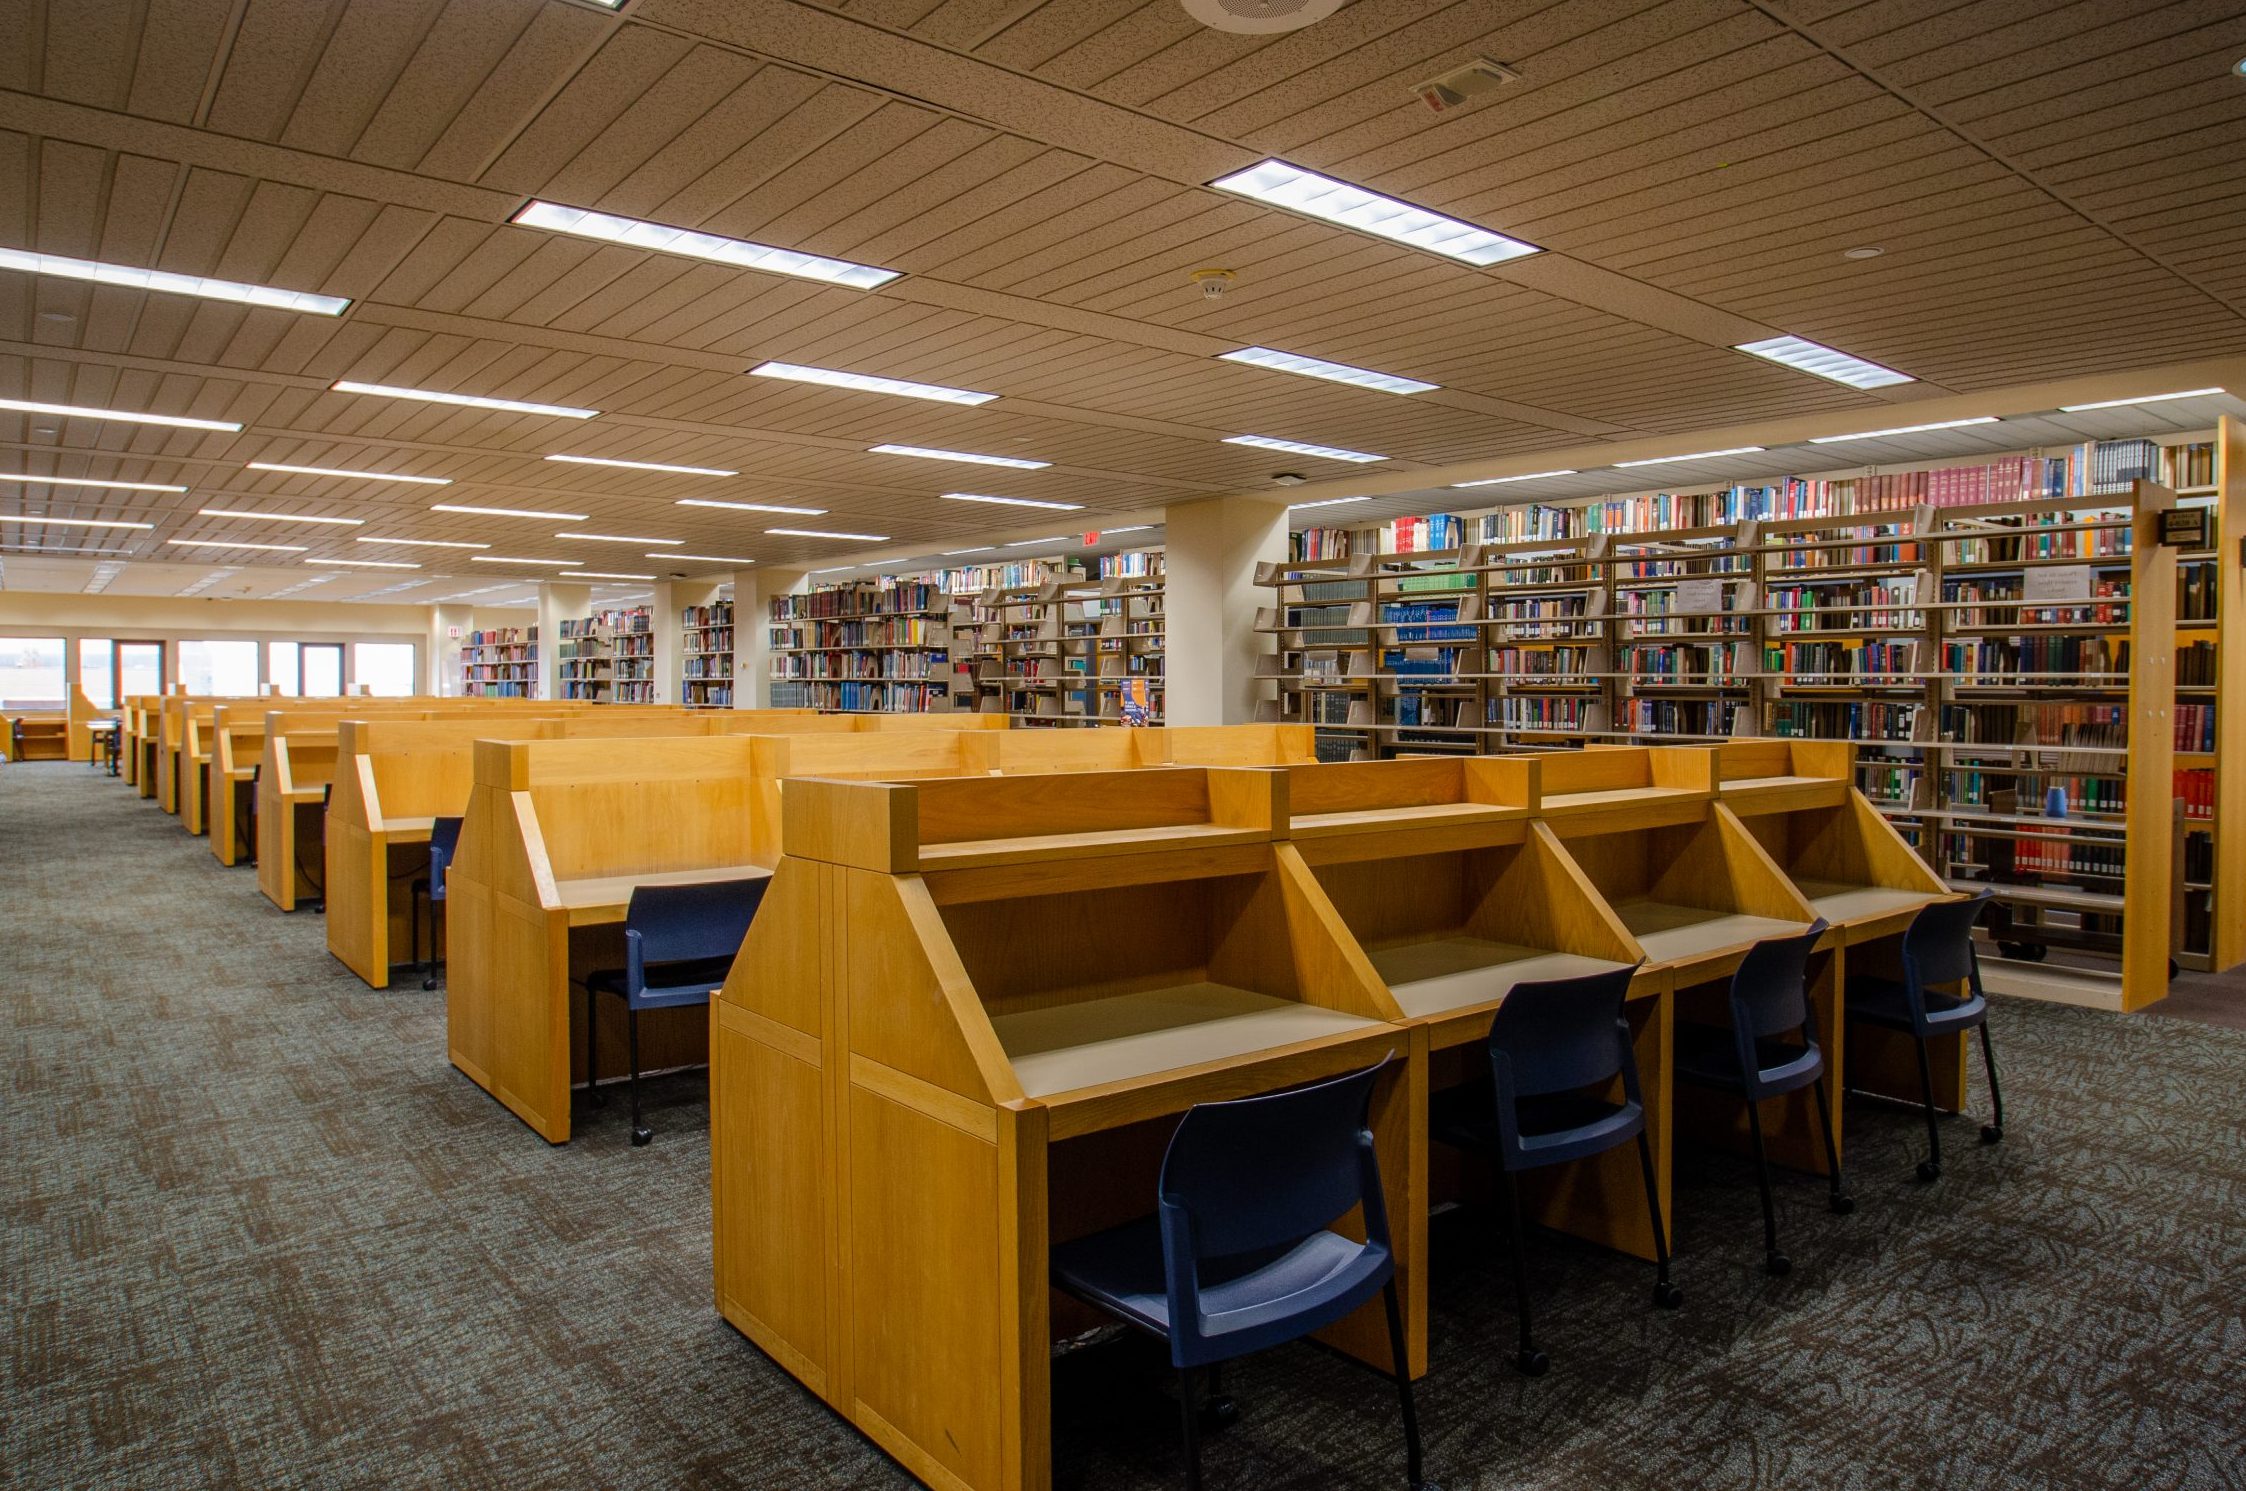 quiet study carrels in hodges library at ut knoxville